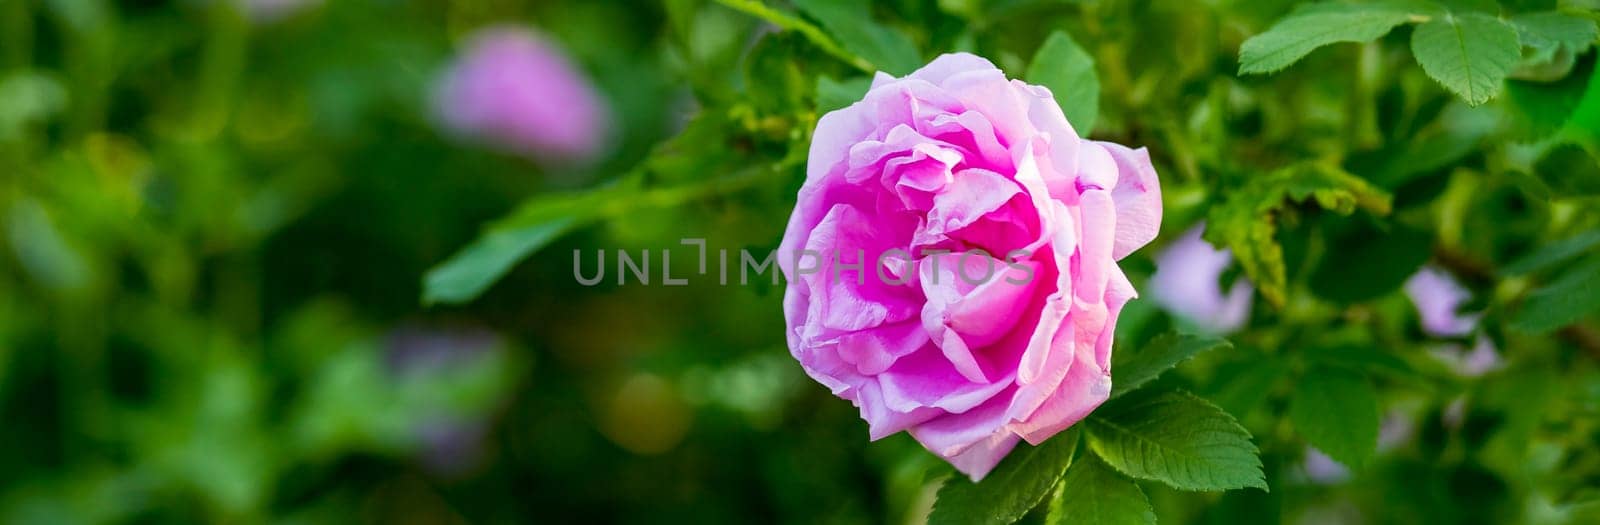 A single pink garden rose blooming close up